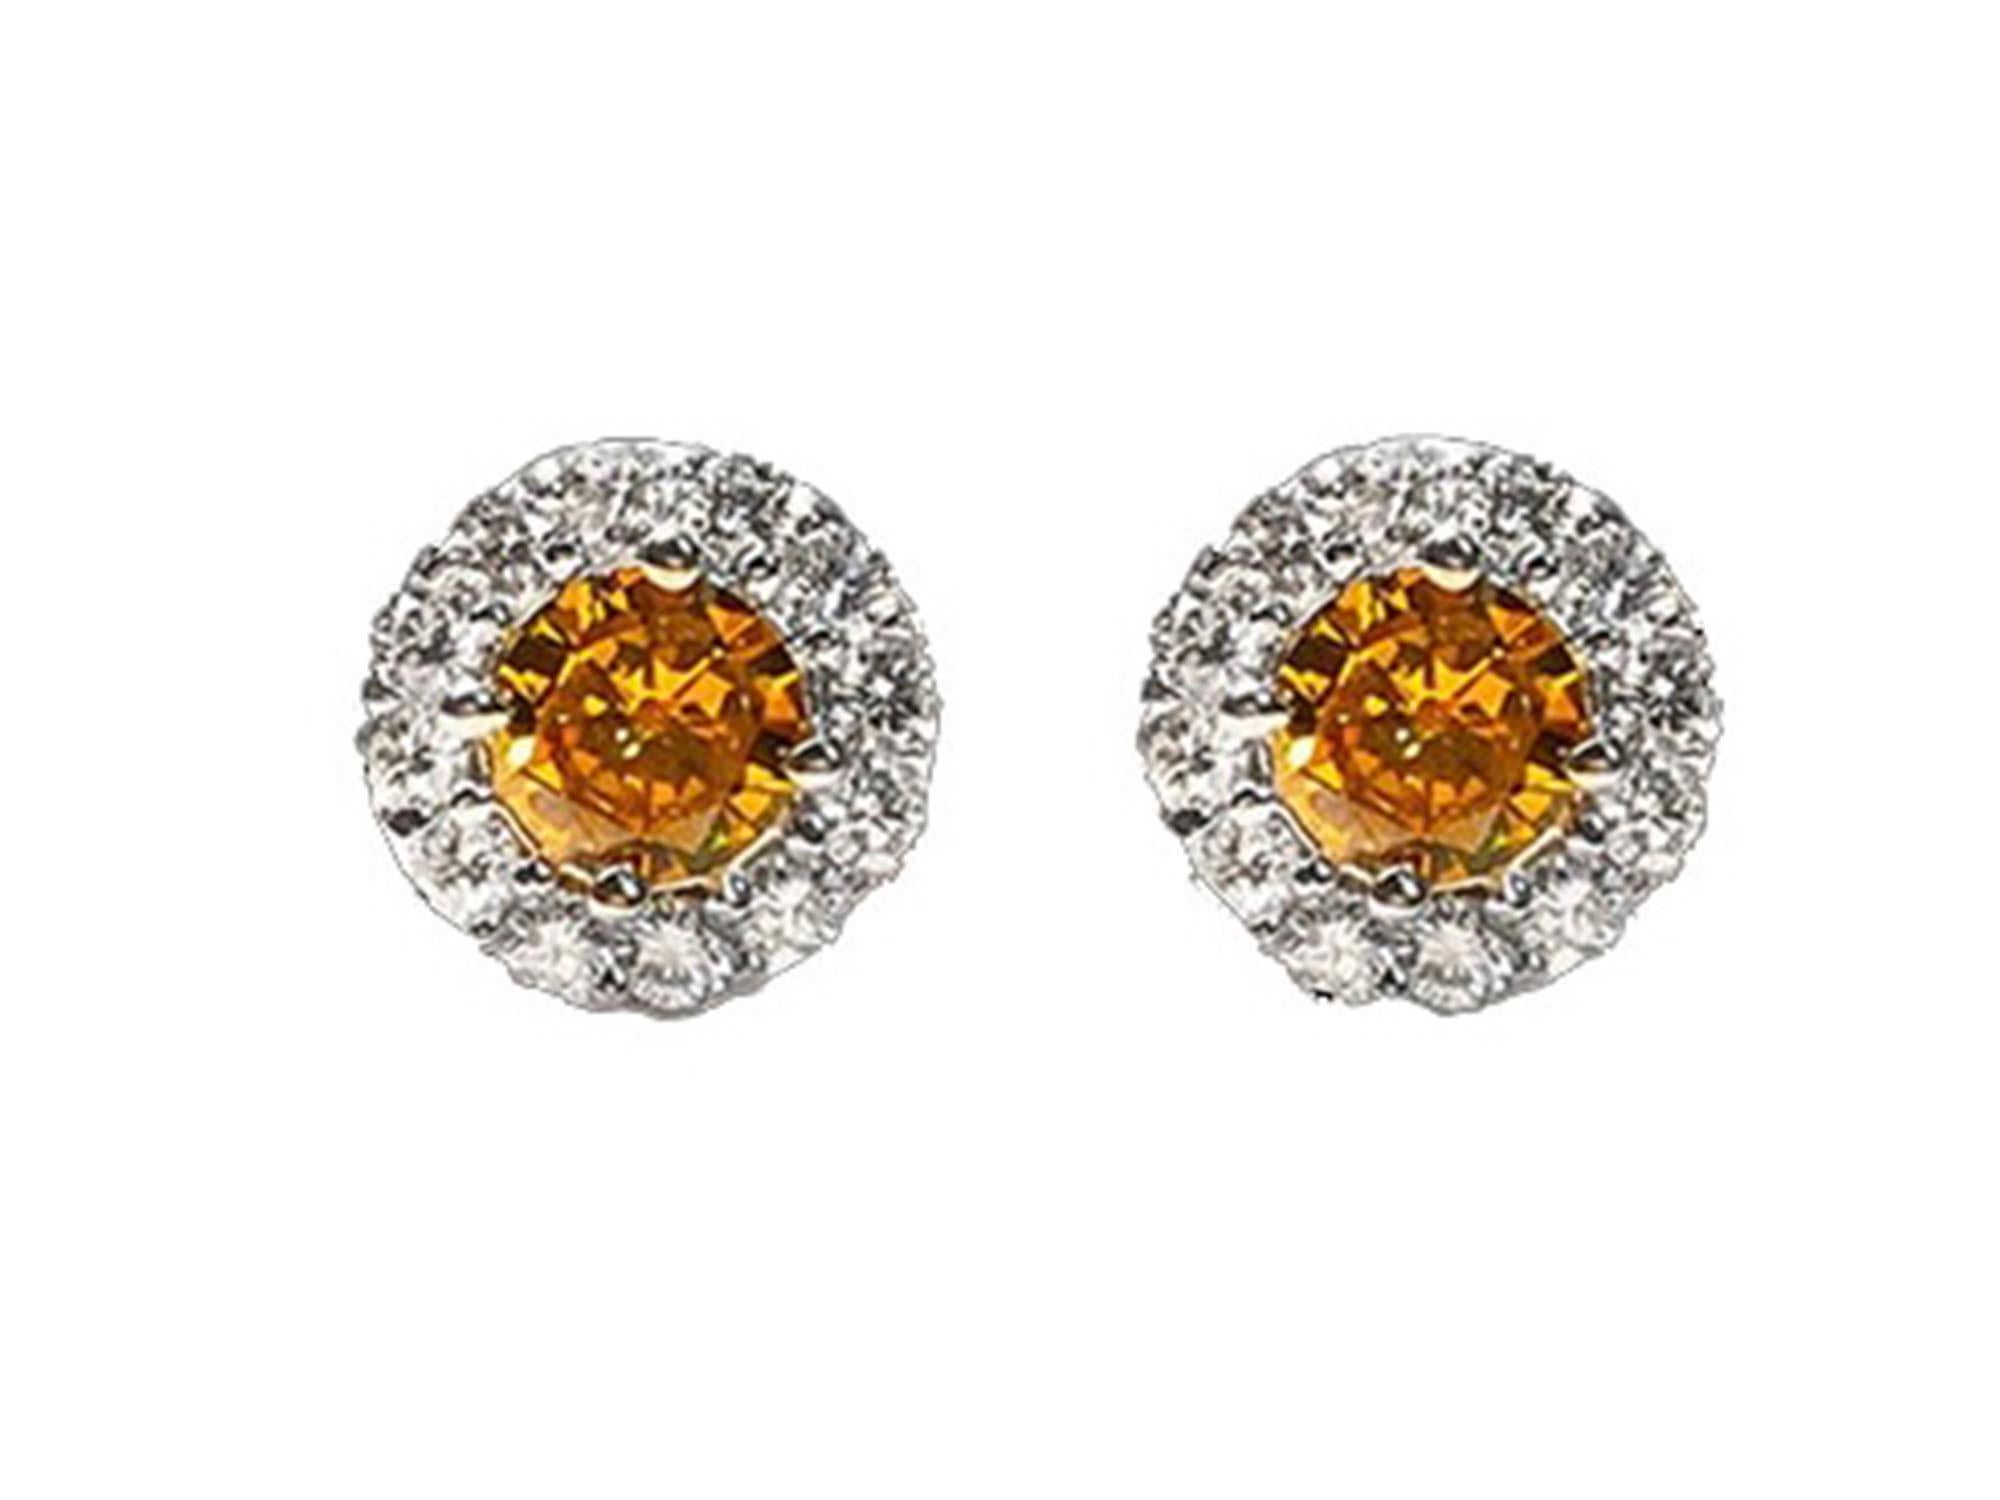 Round Cut 1.30 Carat Fancy Brownish Orangy Yellow & White Diamond Stud Earrings, 18K Gold. For Sale